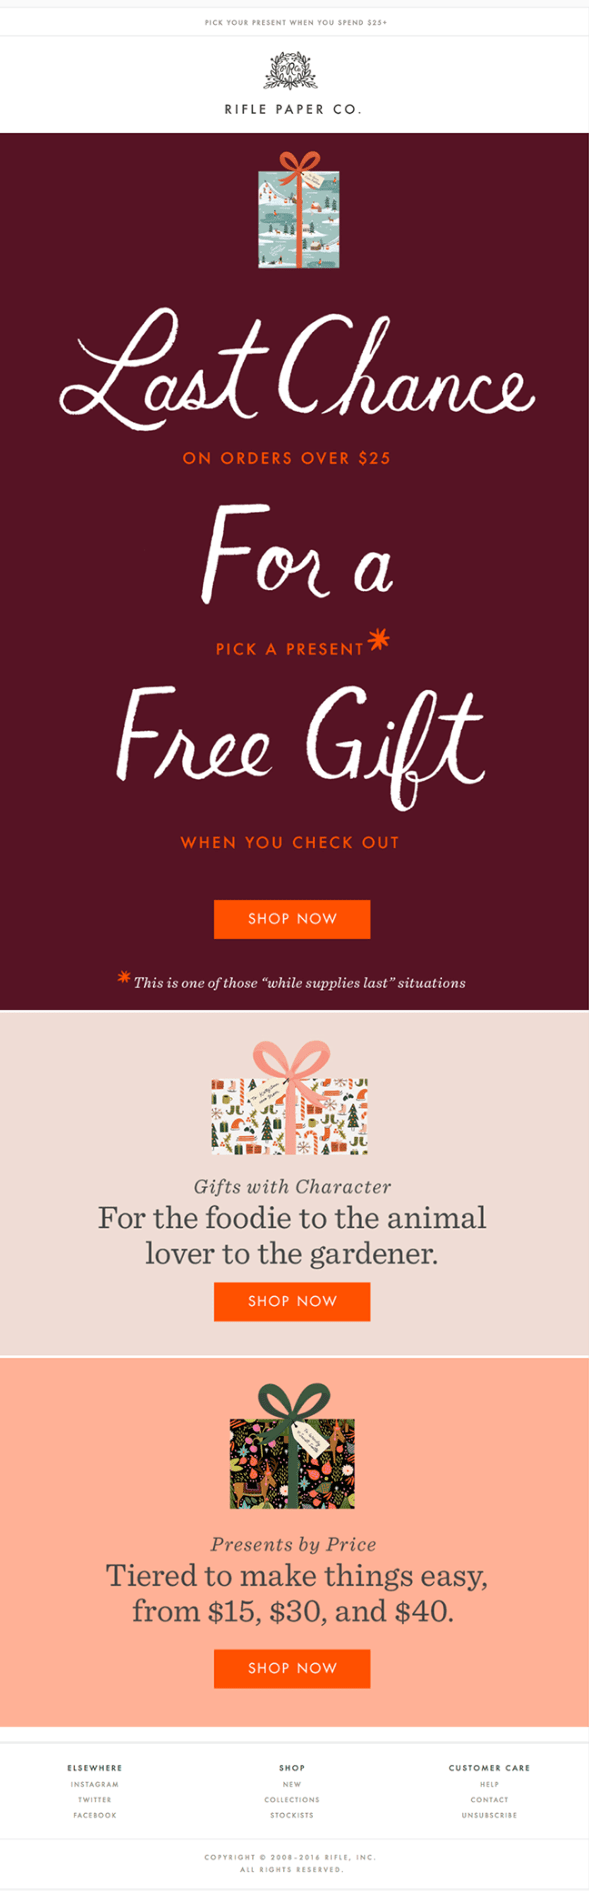 Christmas email example by Rifle Paper Co with a time sensitive offer